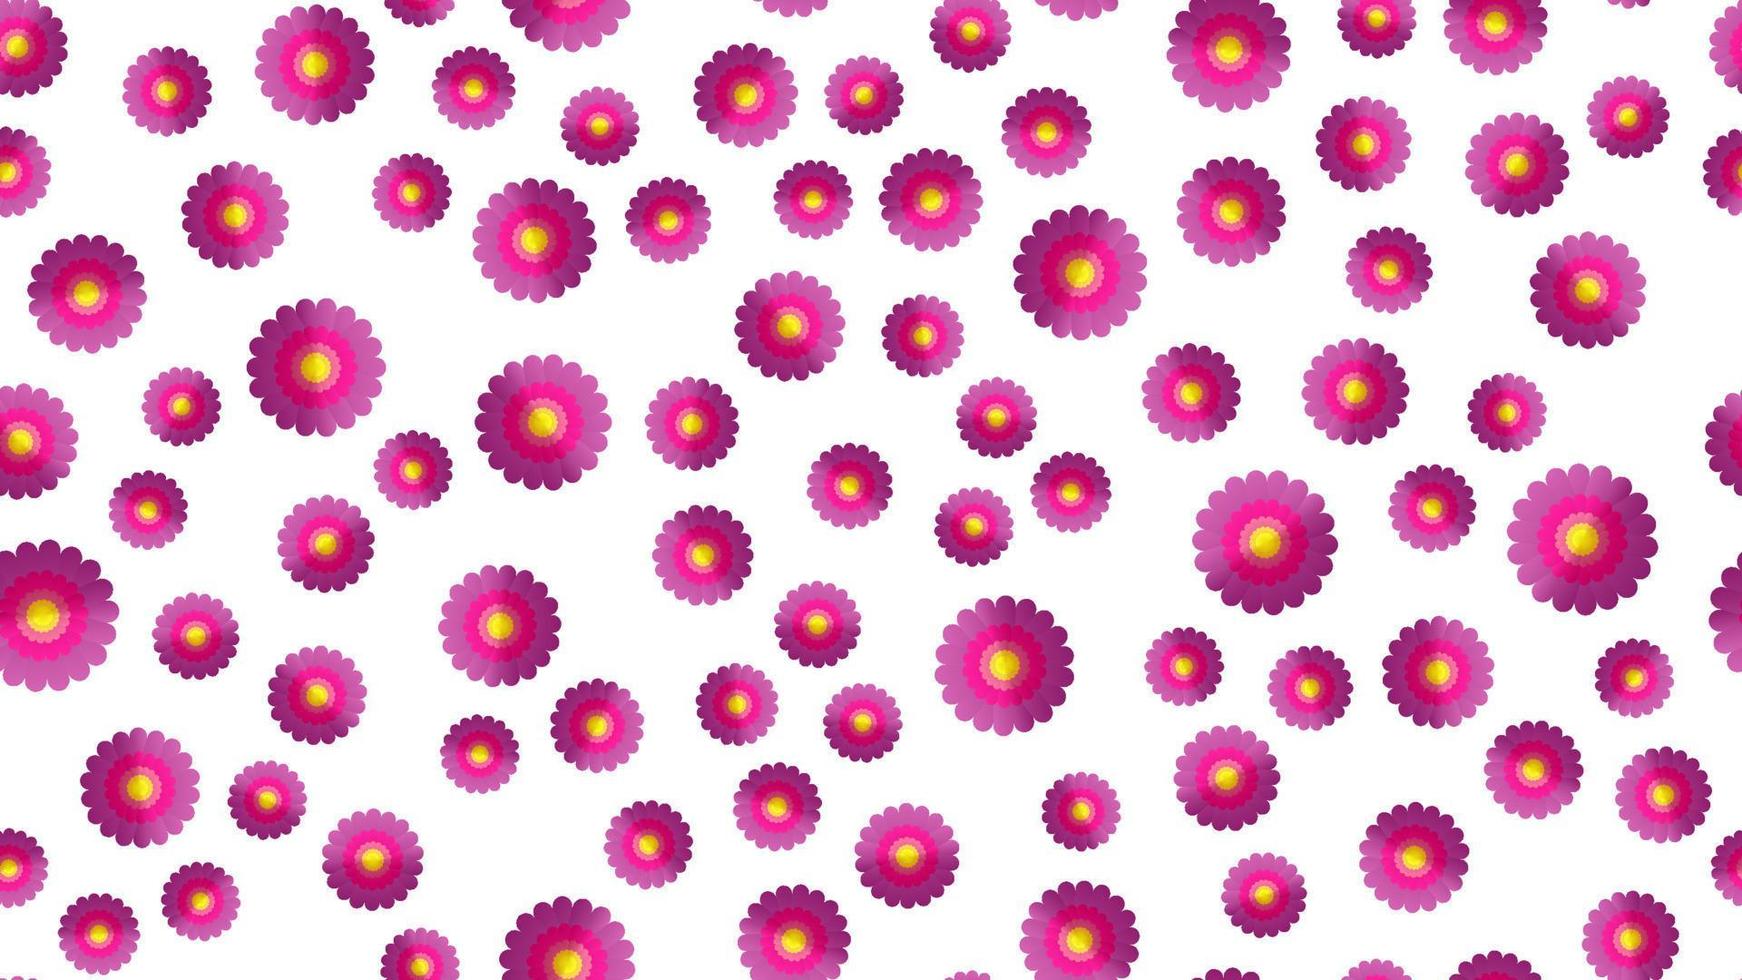 Endless seamless pattern of violet beautiful wildflowers with petals on a white background. Vector illustration